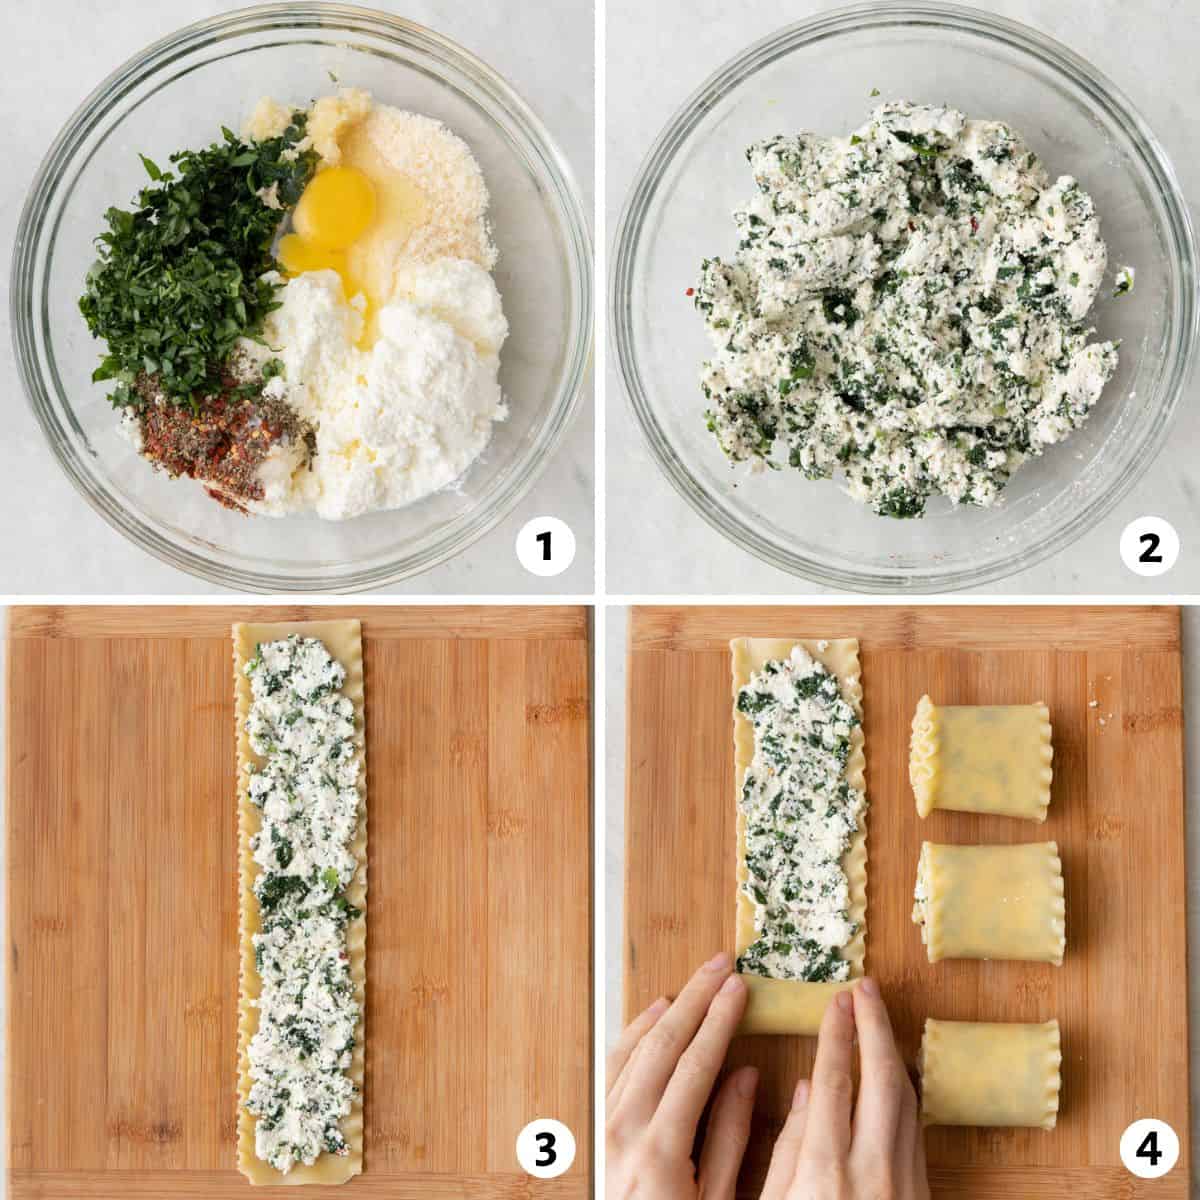 4 image collage preparing recipe: 1- filling ingredient in bowl before being mixed, 2- after being mixed, 3- lasagne noodle on cutting board with filling spread on, 4- hand roll up noodle with filling with 3 more rolls nearby.